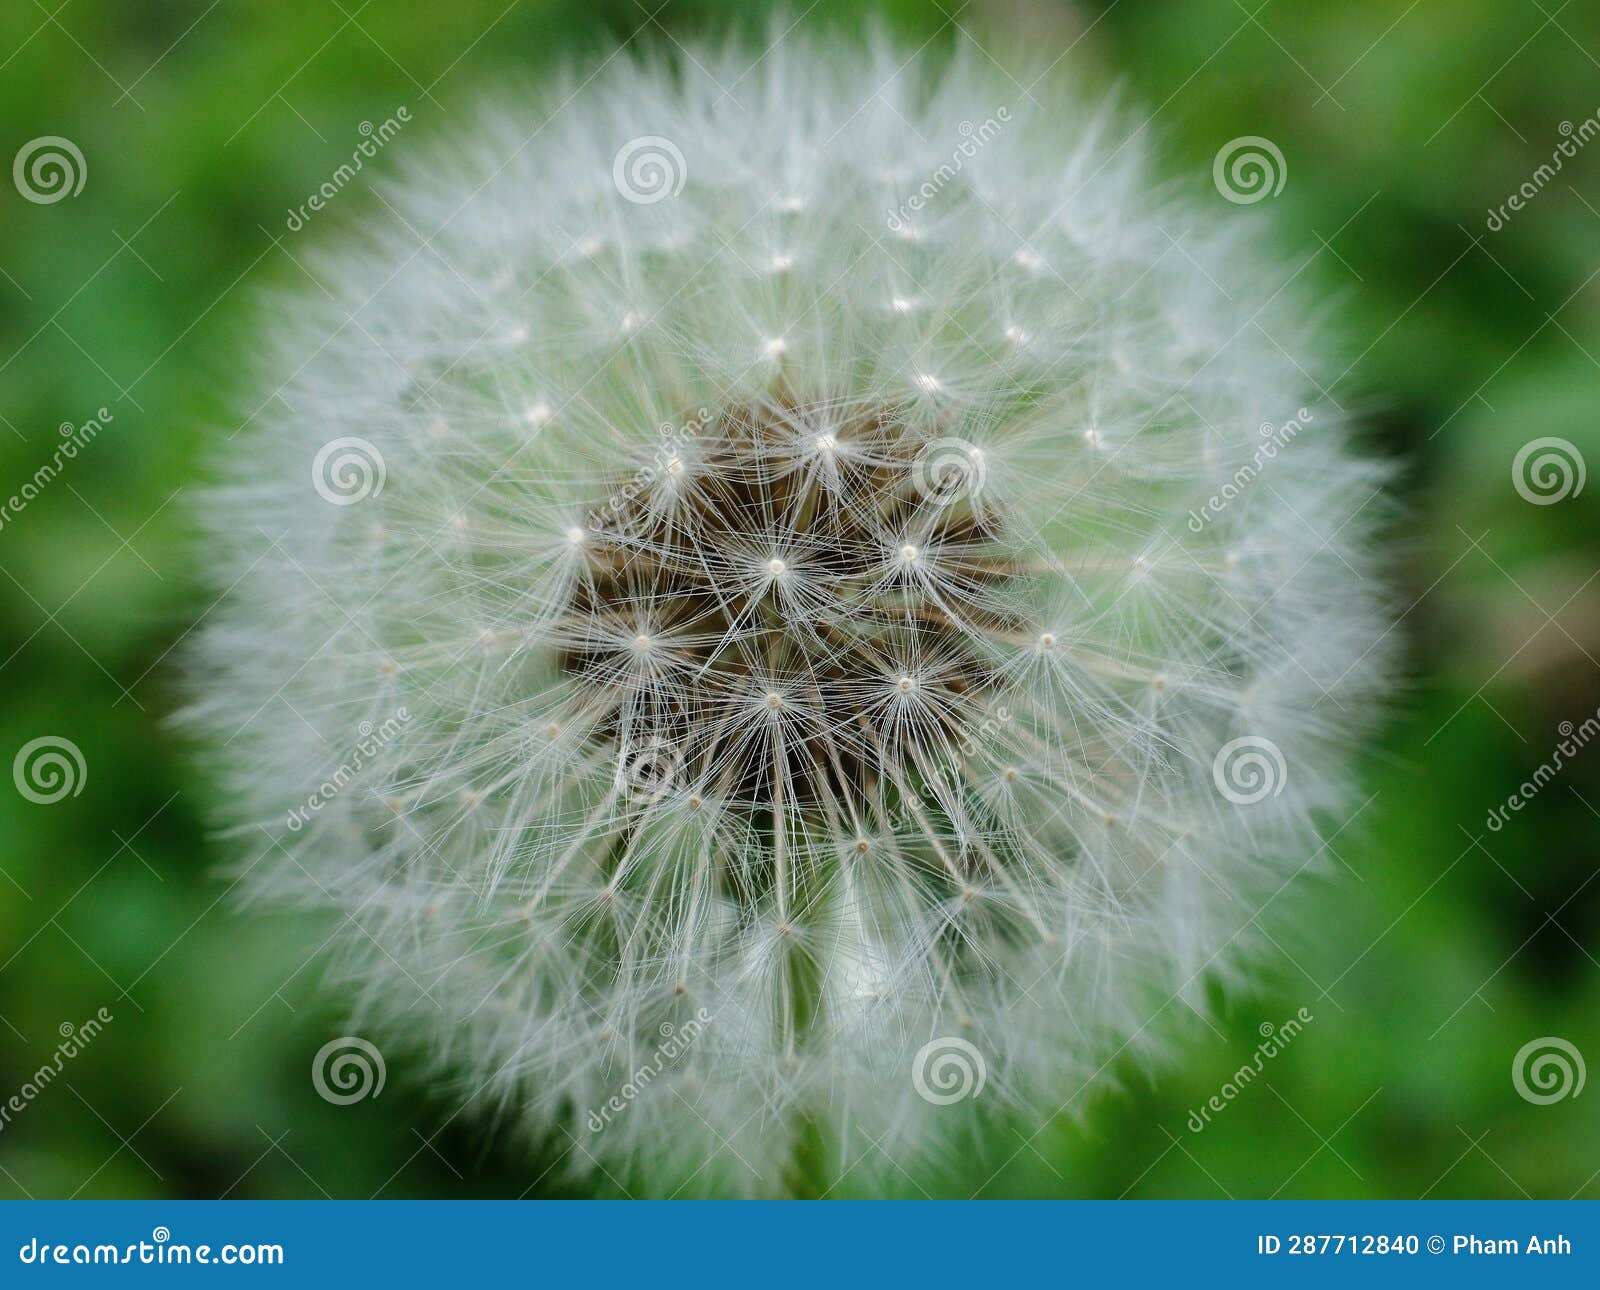 dandelion-dandelion-is-also-known-as-wild-lettuce-spearhead-or-plowshare-stock-photo-image